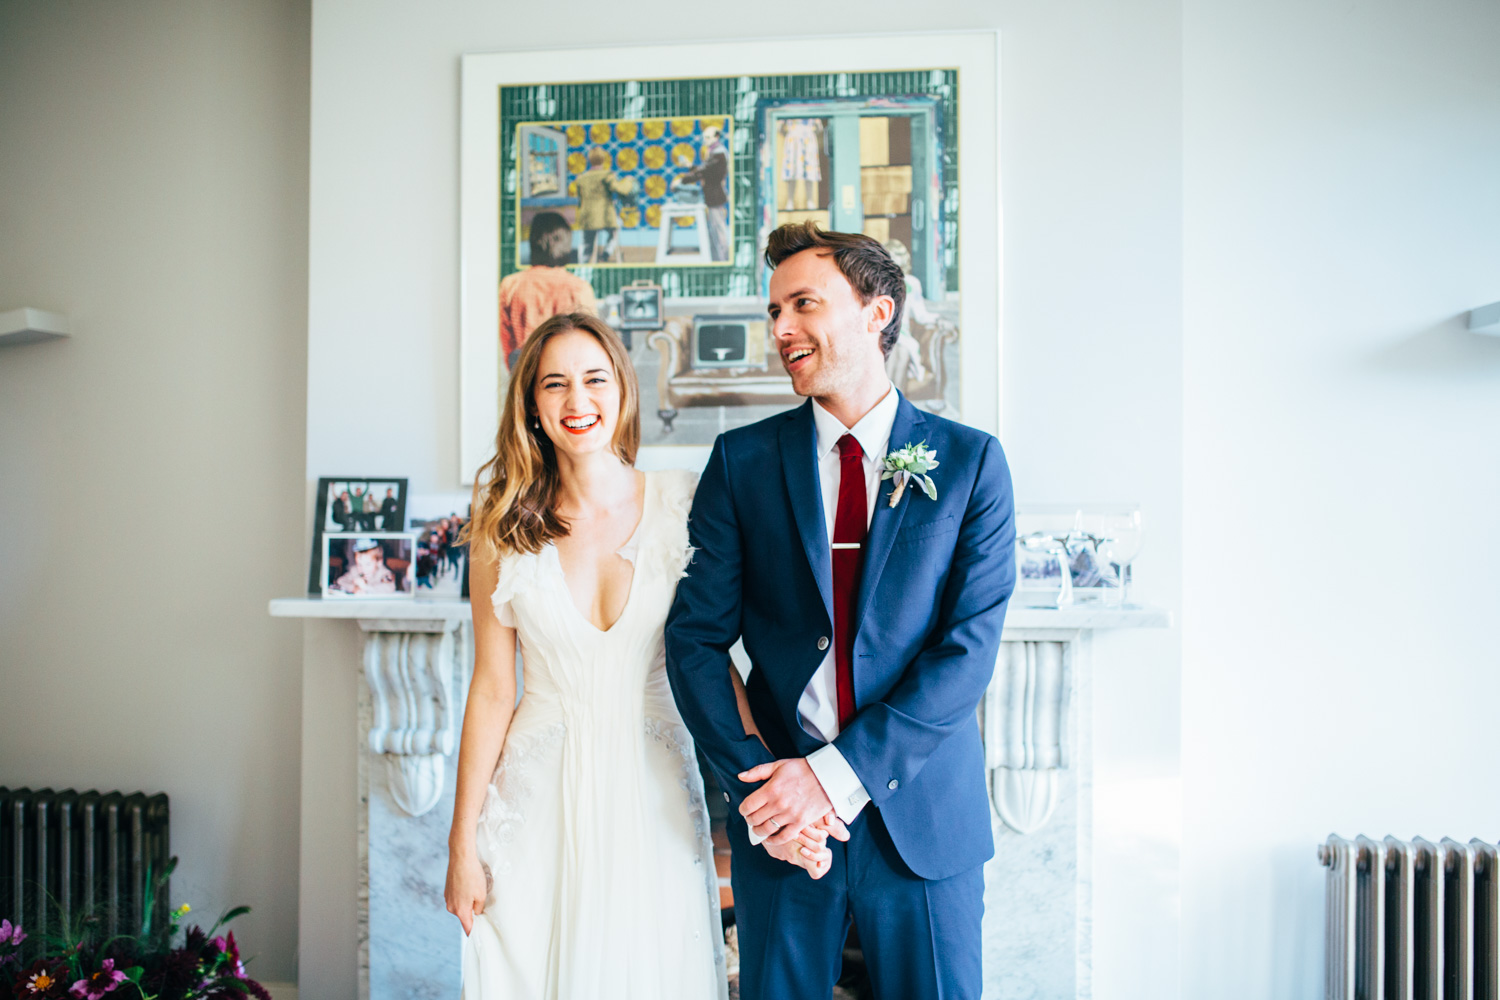 laughing bride and groom at home wedding photography in suffolk